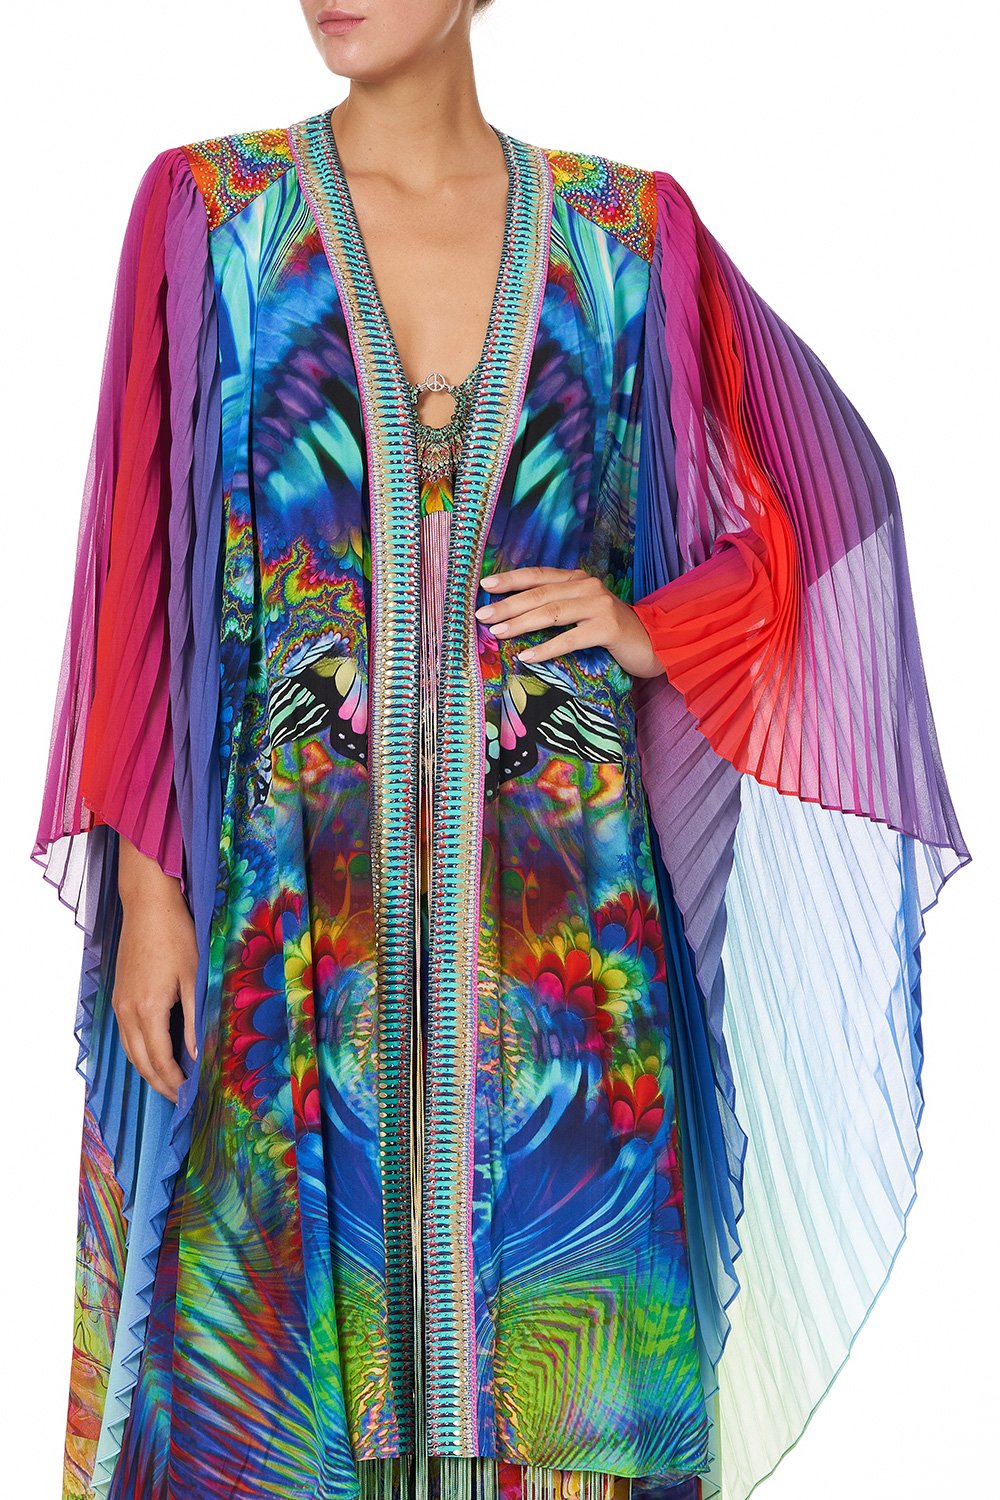 DRAMATIC PLEATED LAYER HYPED UP HIPPIE